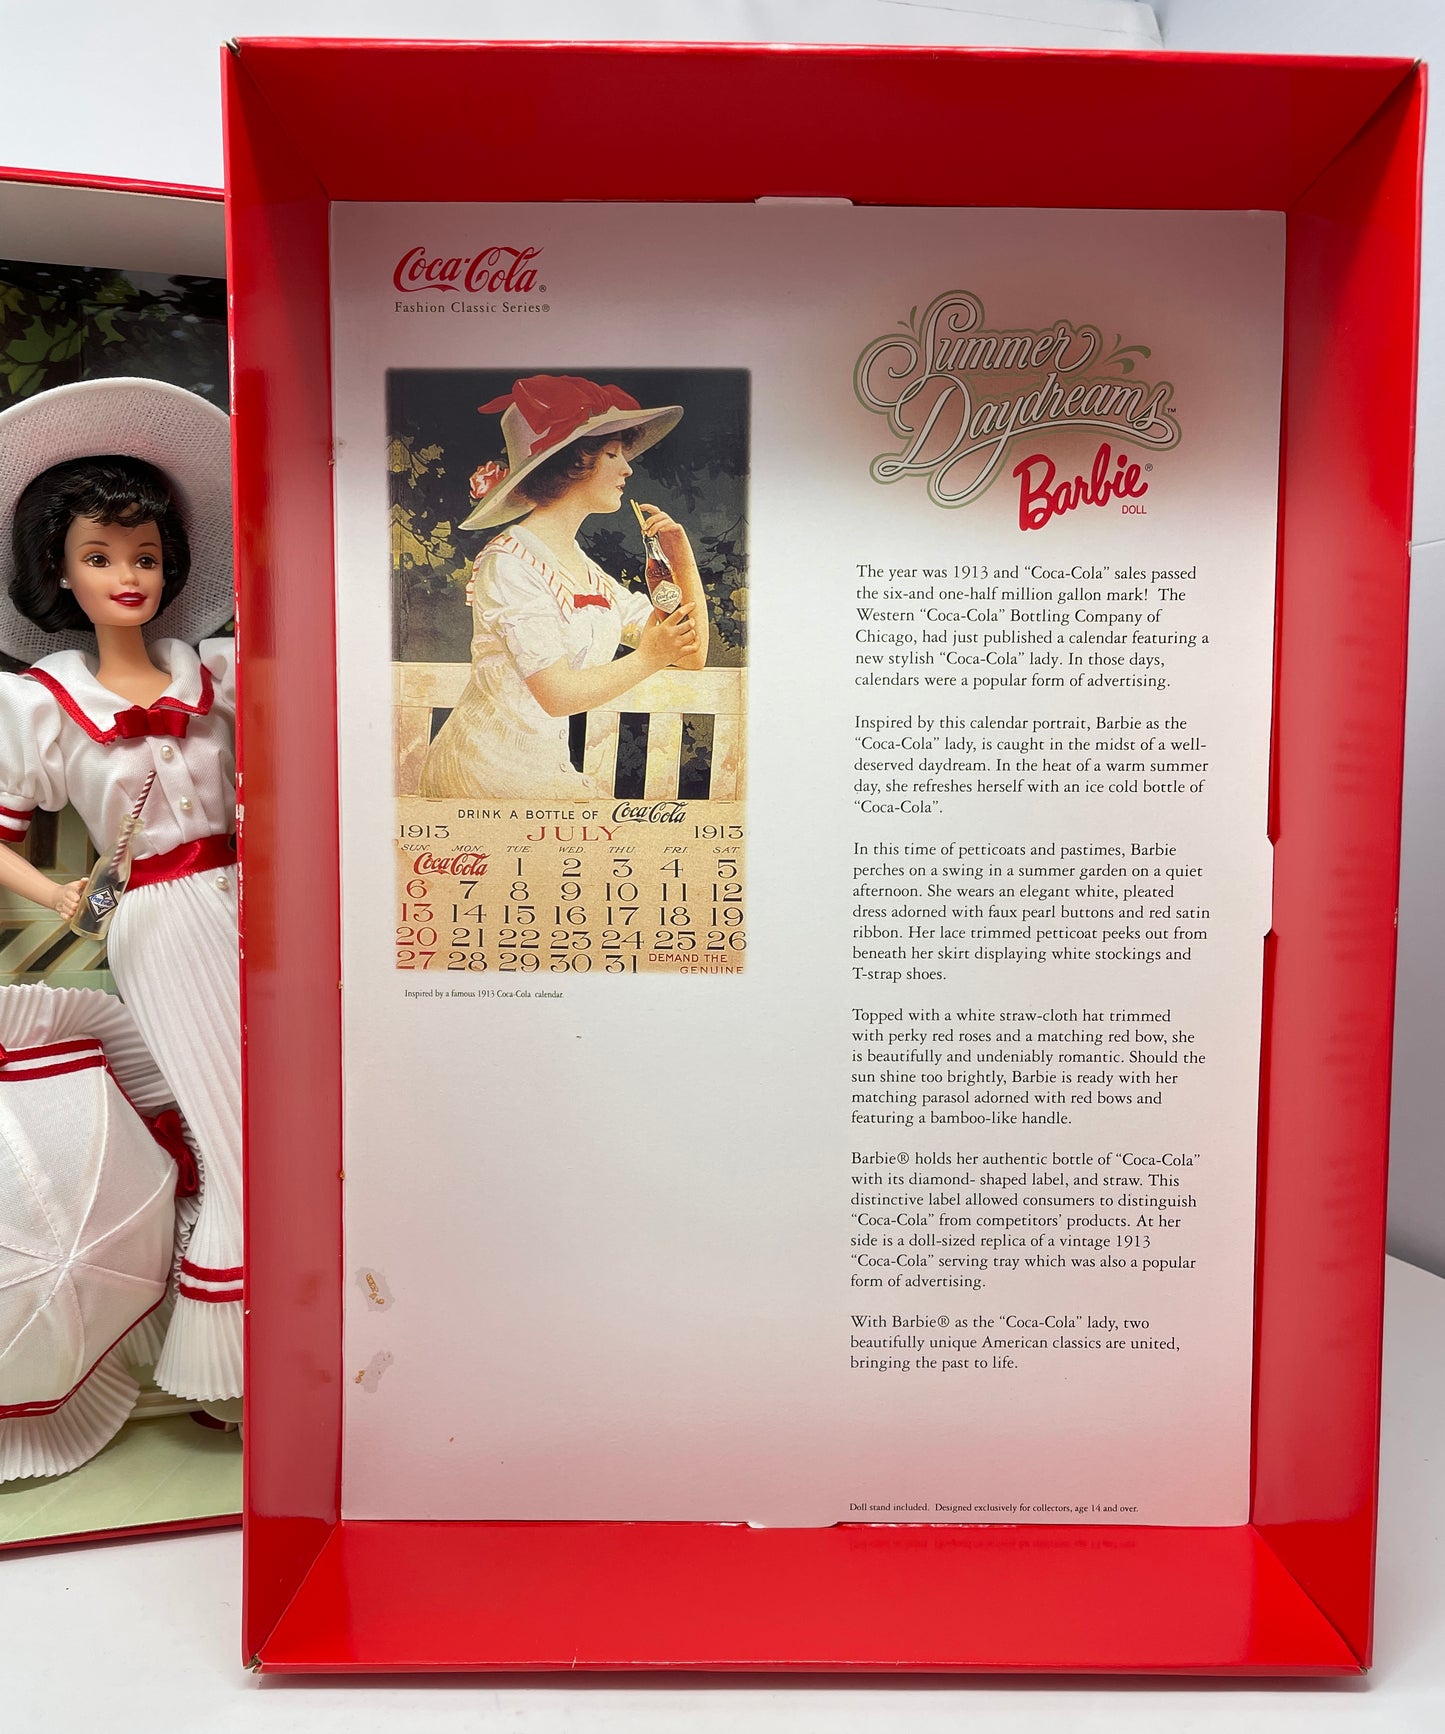 SUMMER DAYDREAMS BARBIE - COCA-COLA FASHION CLASSIC SERIES - #19739 - COLLECTOR EDITION - THIRD IN A SERIES